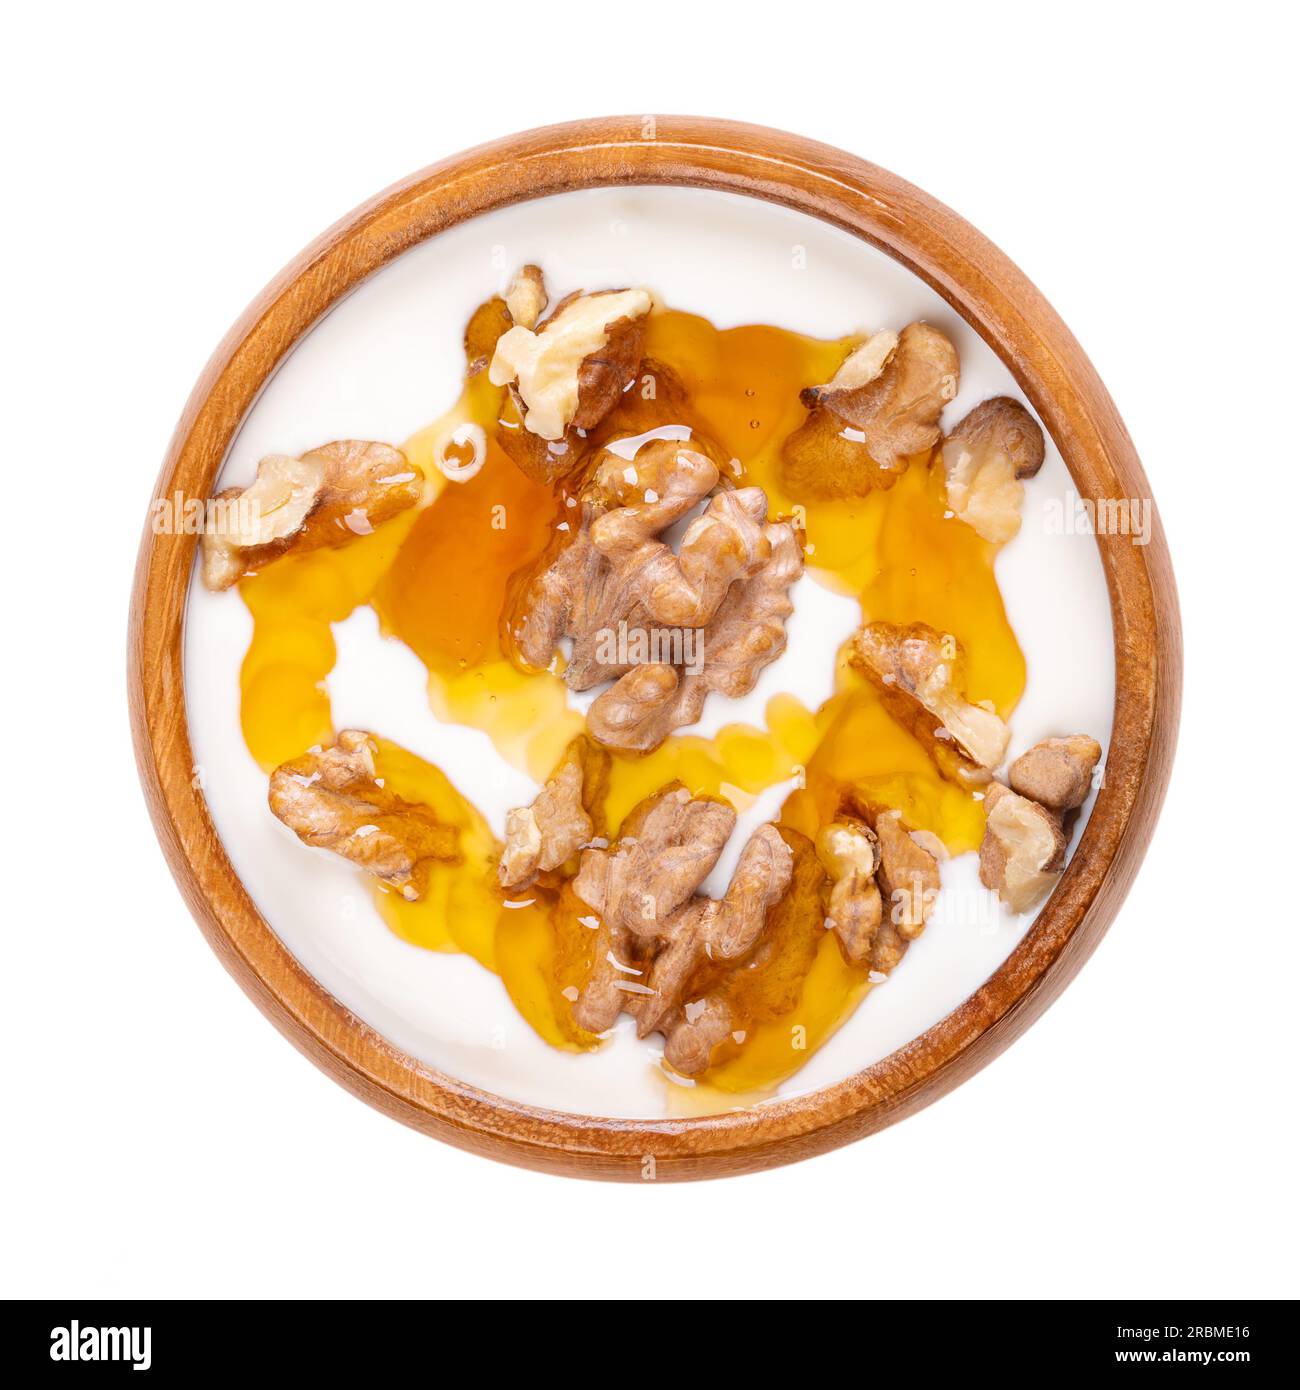 Greek yogurt with honey and roasted walnuts, in a wooden bowl. Yiaourti me meli, traditional little treat, dessert and snack. Stock Photo